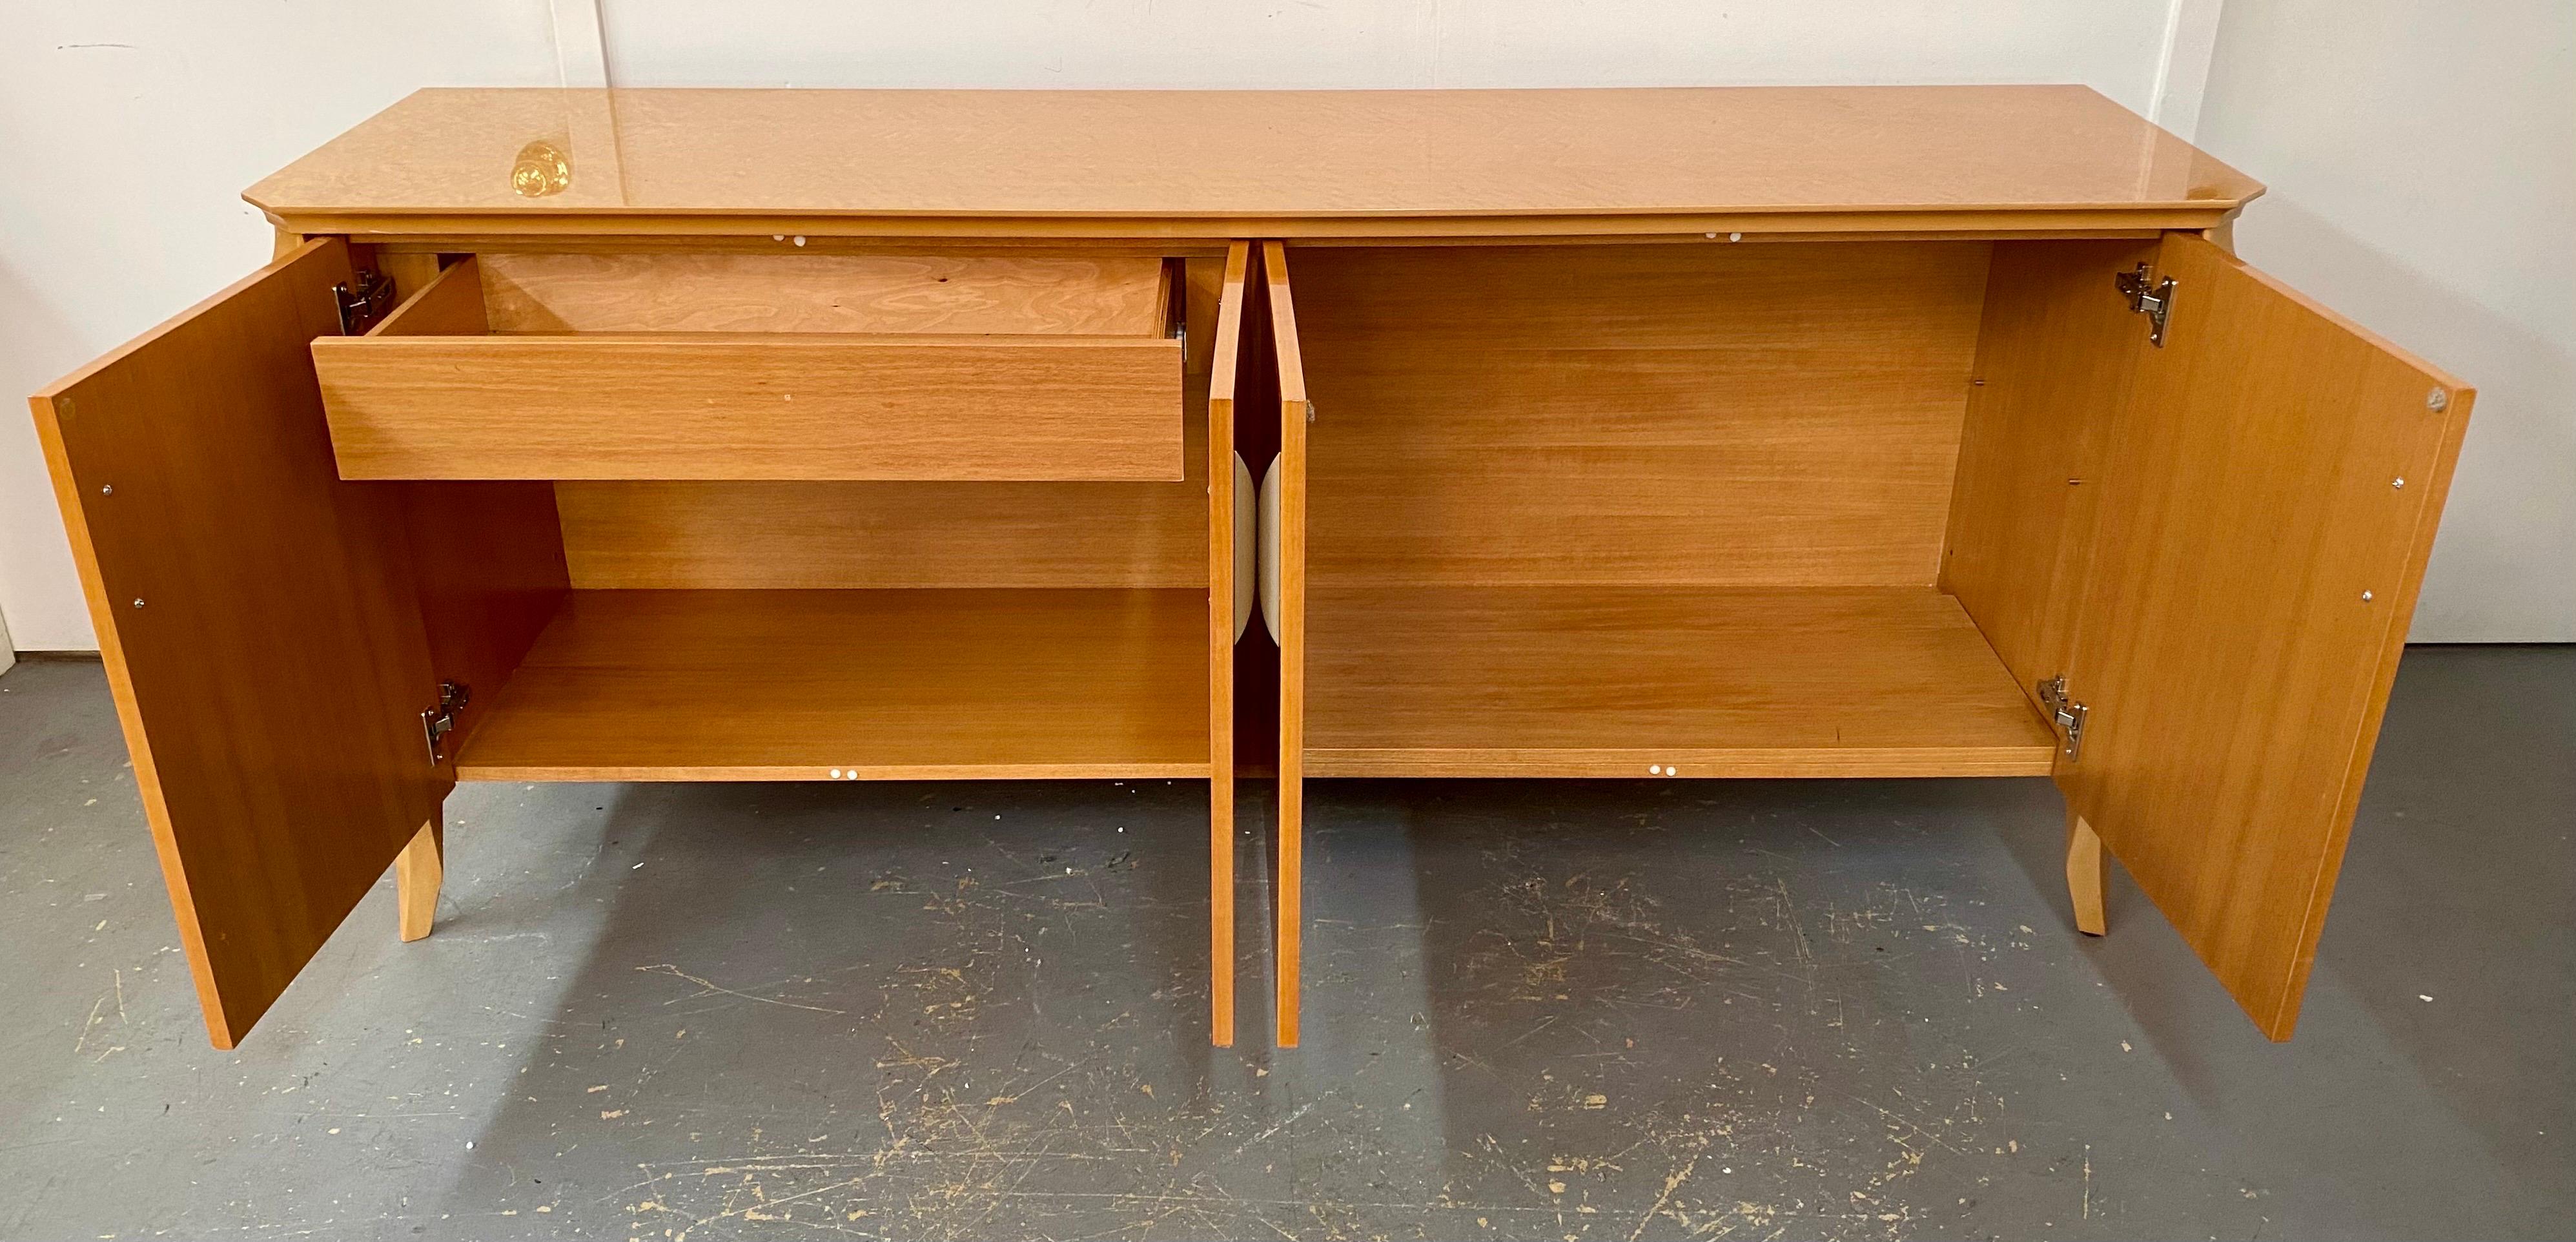 Pietro Contantini Postmodern Italian Maple Lacquer Credenza, Sideboard Cabinet  In Good Condition For Sale In Plainview, NY